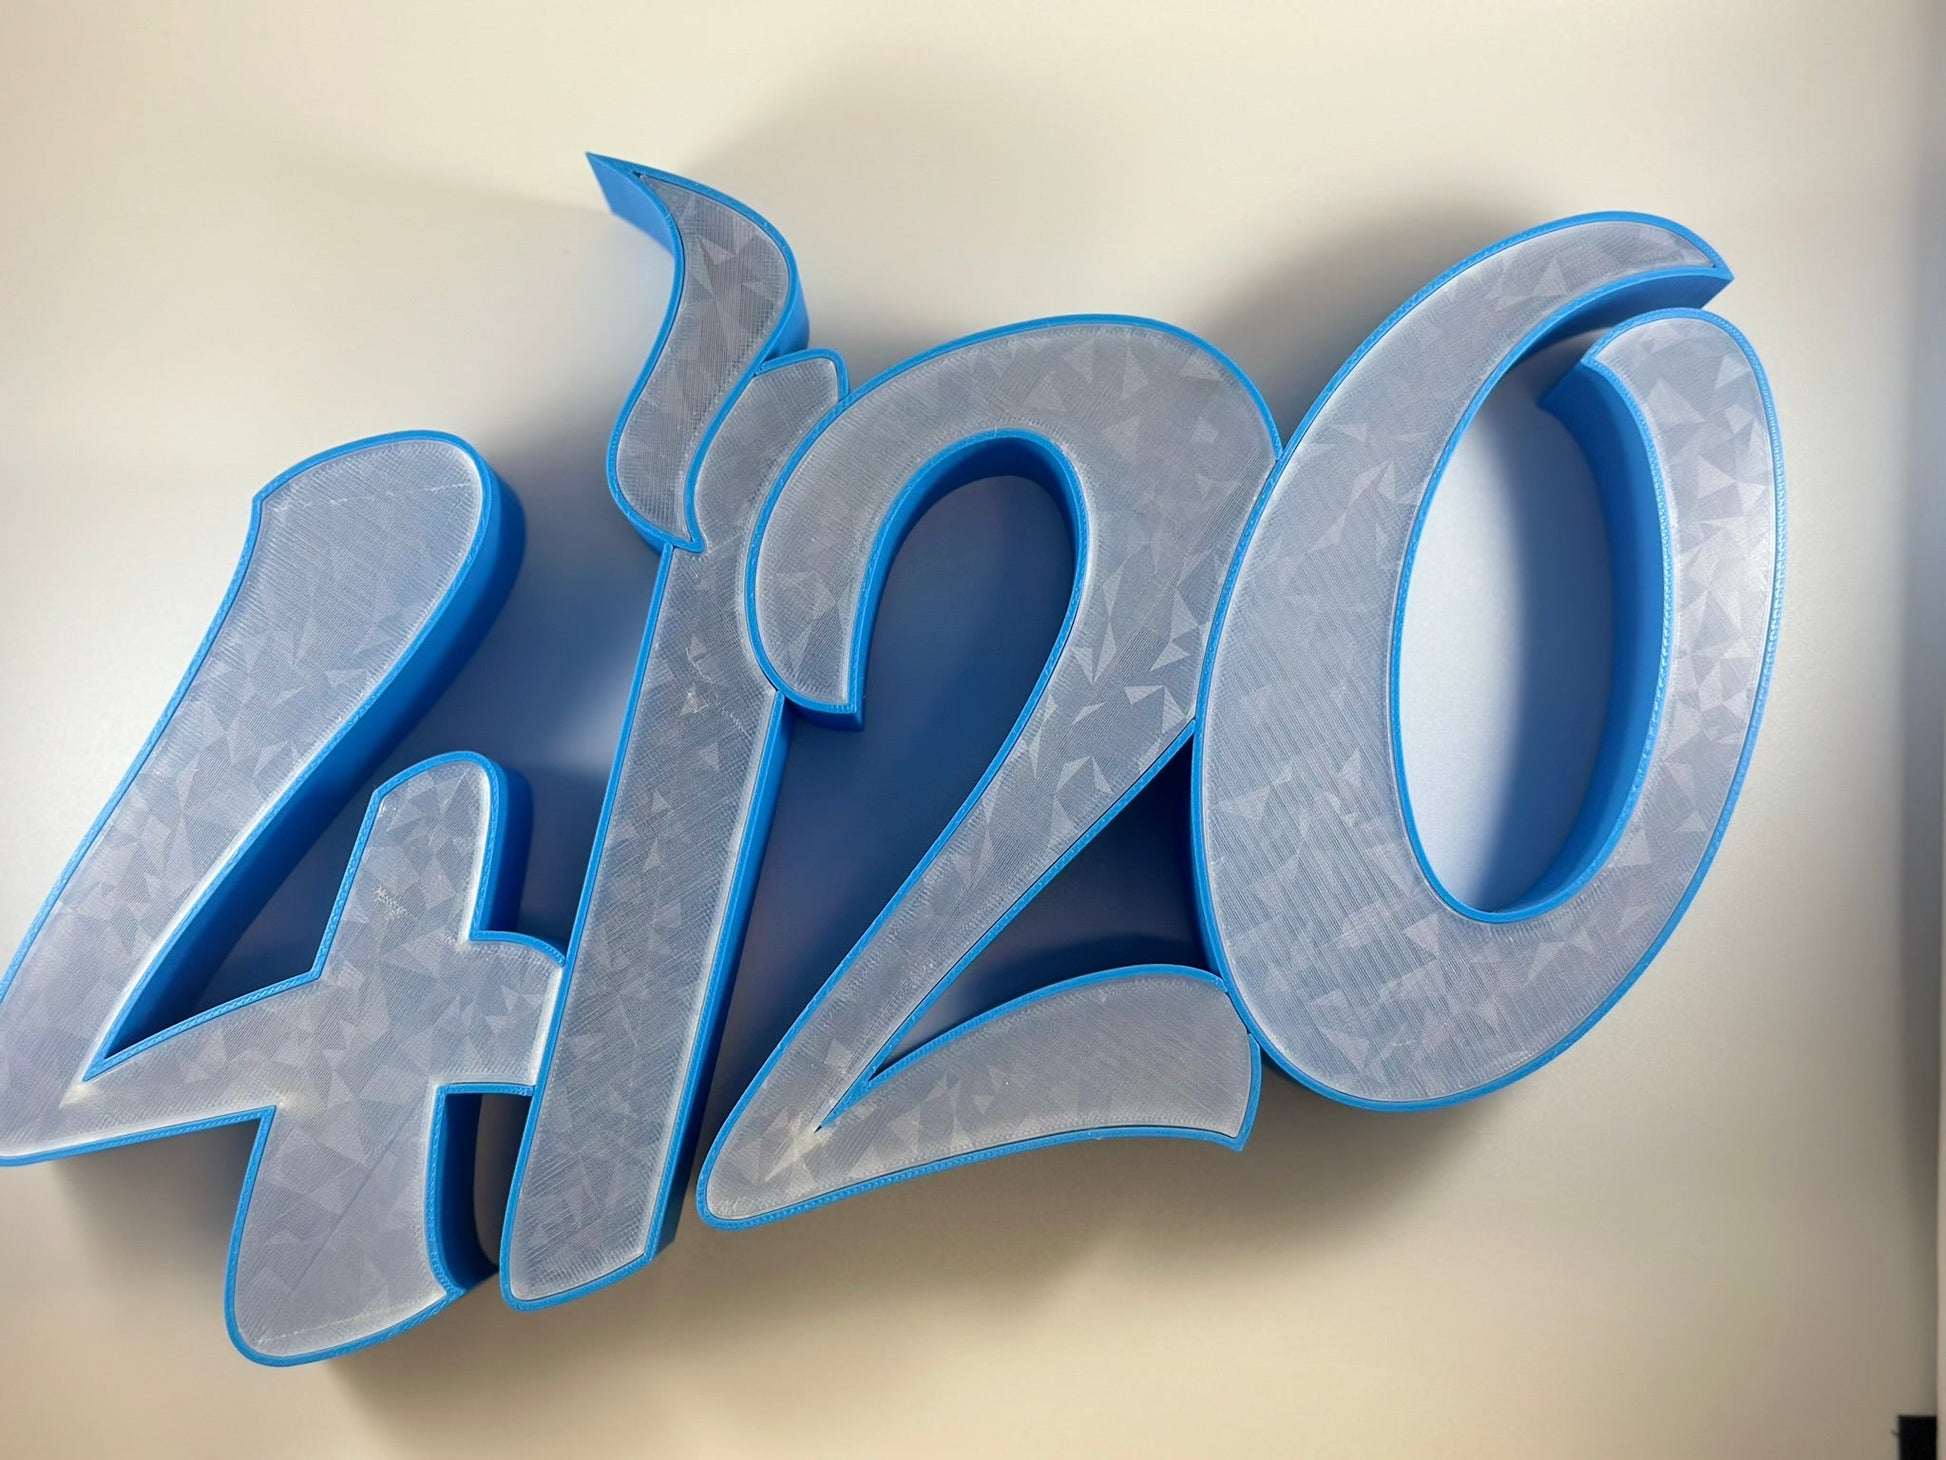 4/20 Glow LED Sign - Dimmable Celebration Light - RudeGrain